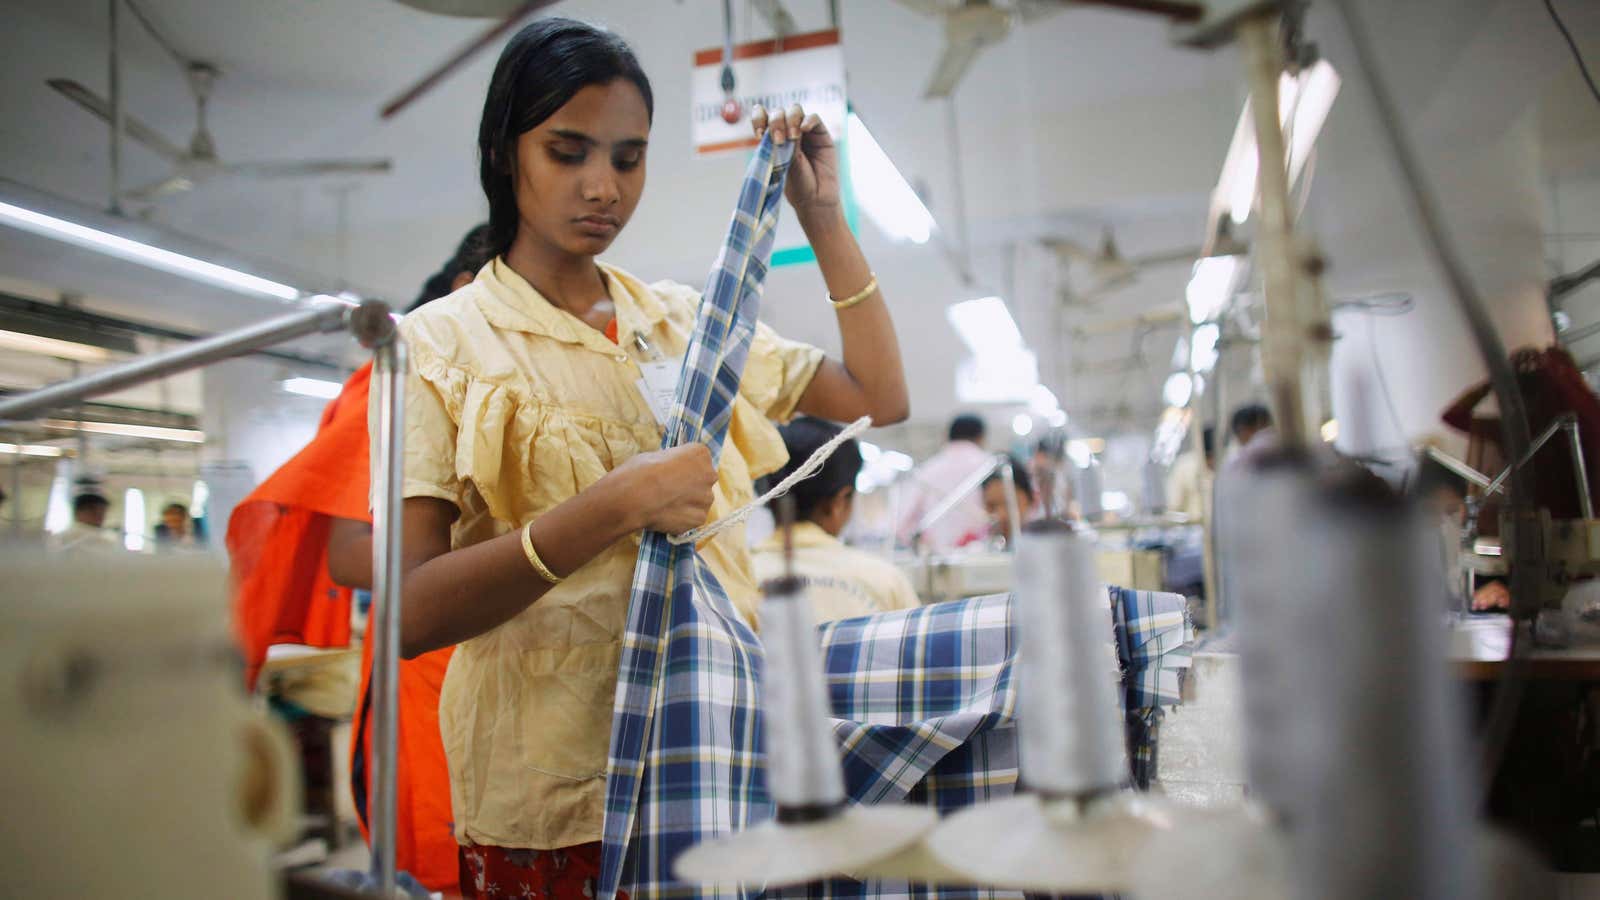 Clothes like these made in Bangladesh get hit hardest by US tariffs.